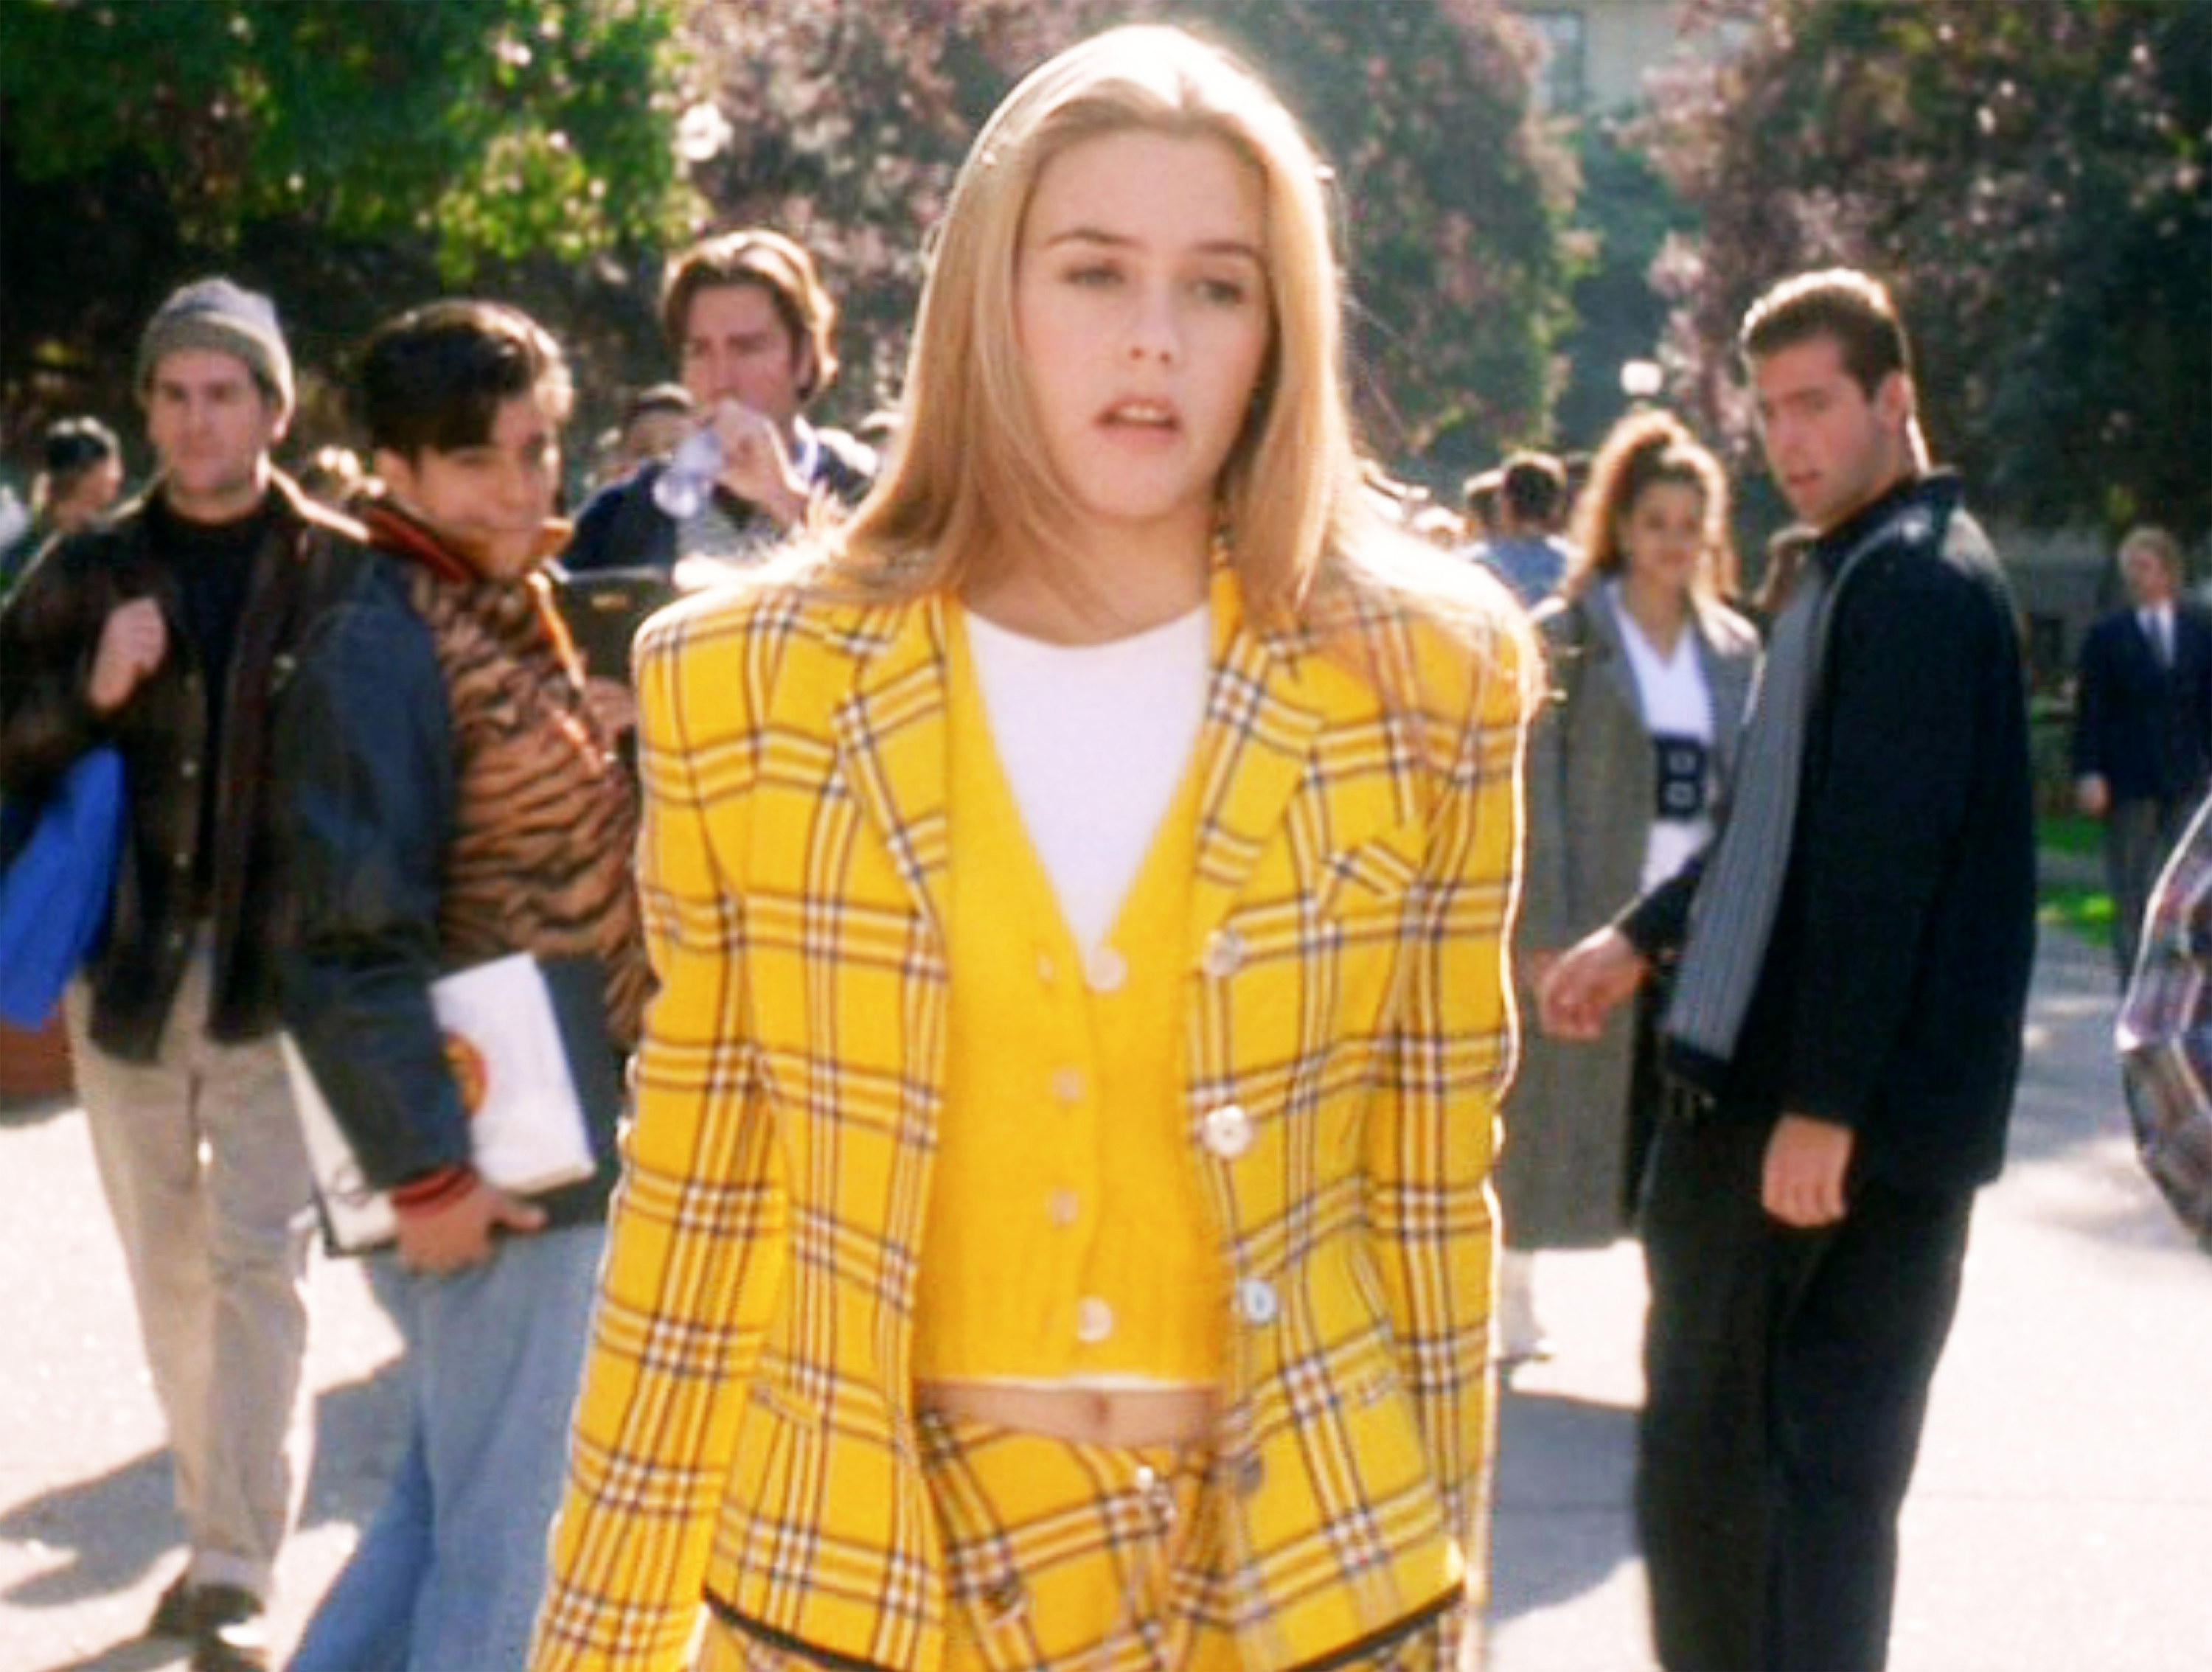 Alicia Silverstone as Cher walks around campus in a yellow co-ord outfit in &quot;Clueless&quot;